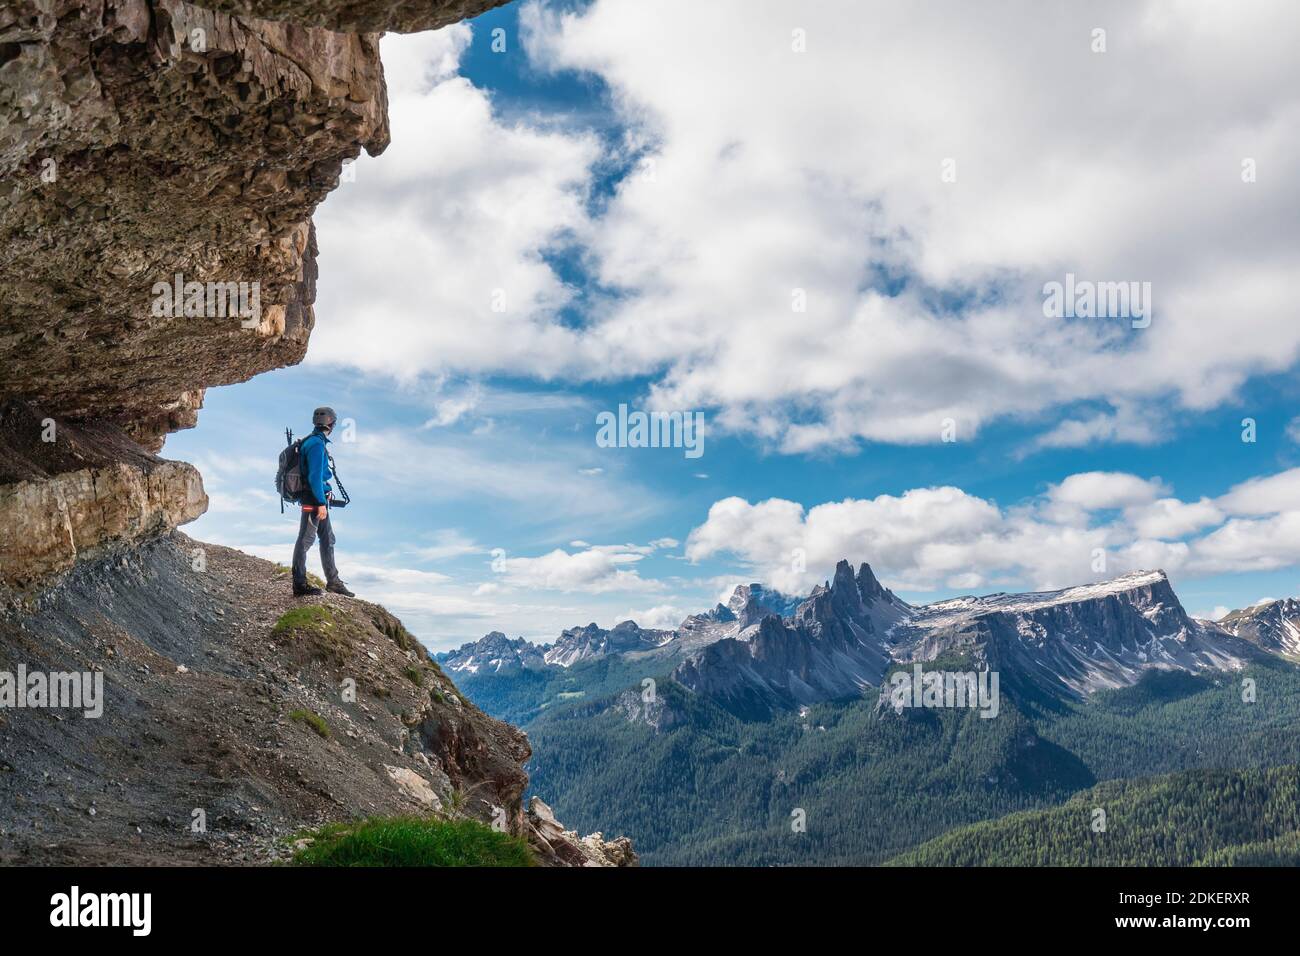 young man 22 years old along the equipped path Astaldi (characteristic for colored rocks) at the foots of Tofane, Cortina d'Ampezzo, Dolomites, Belluno, Veneto, Italy Stock Photo